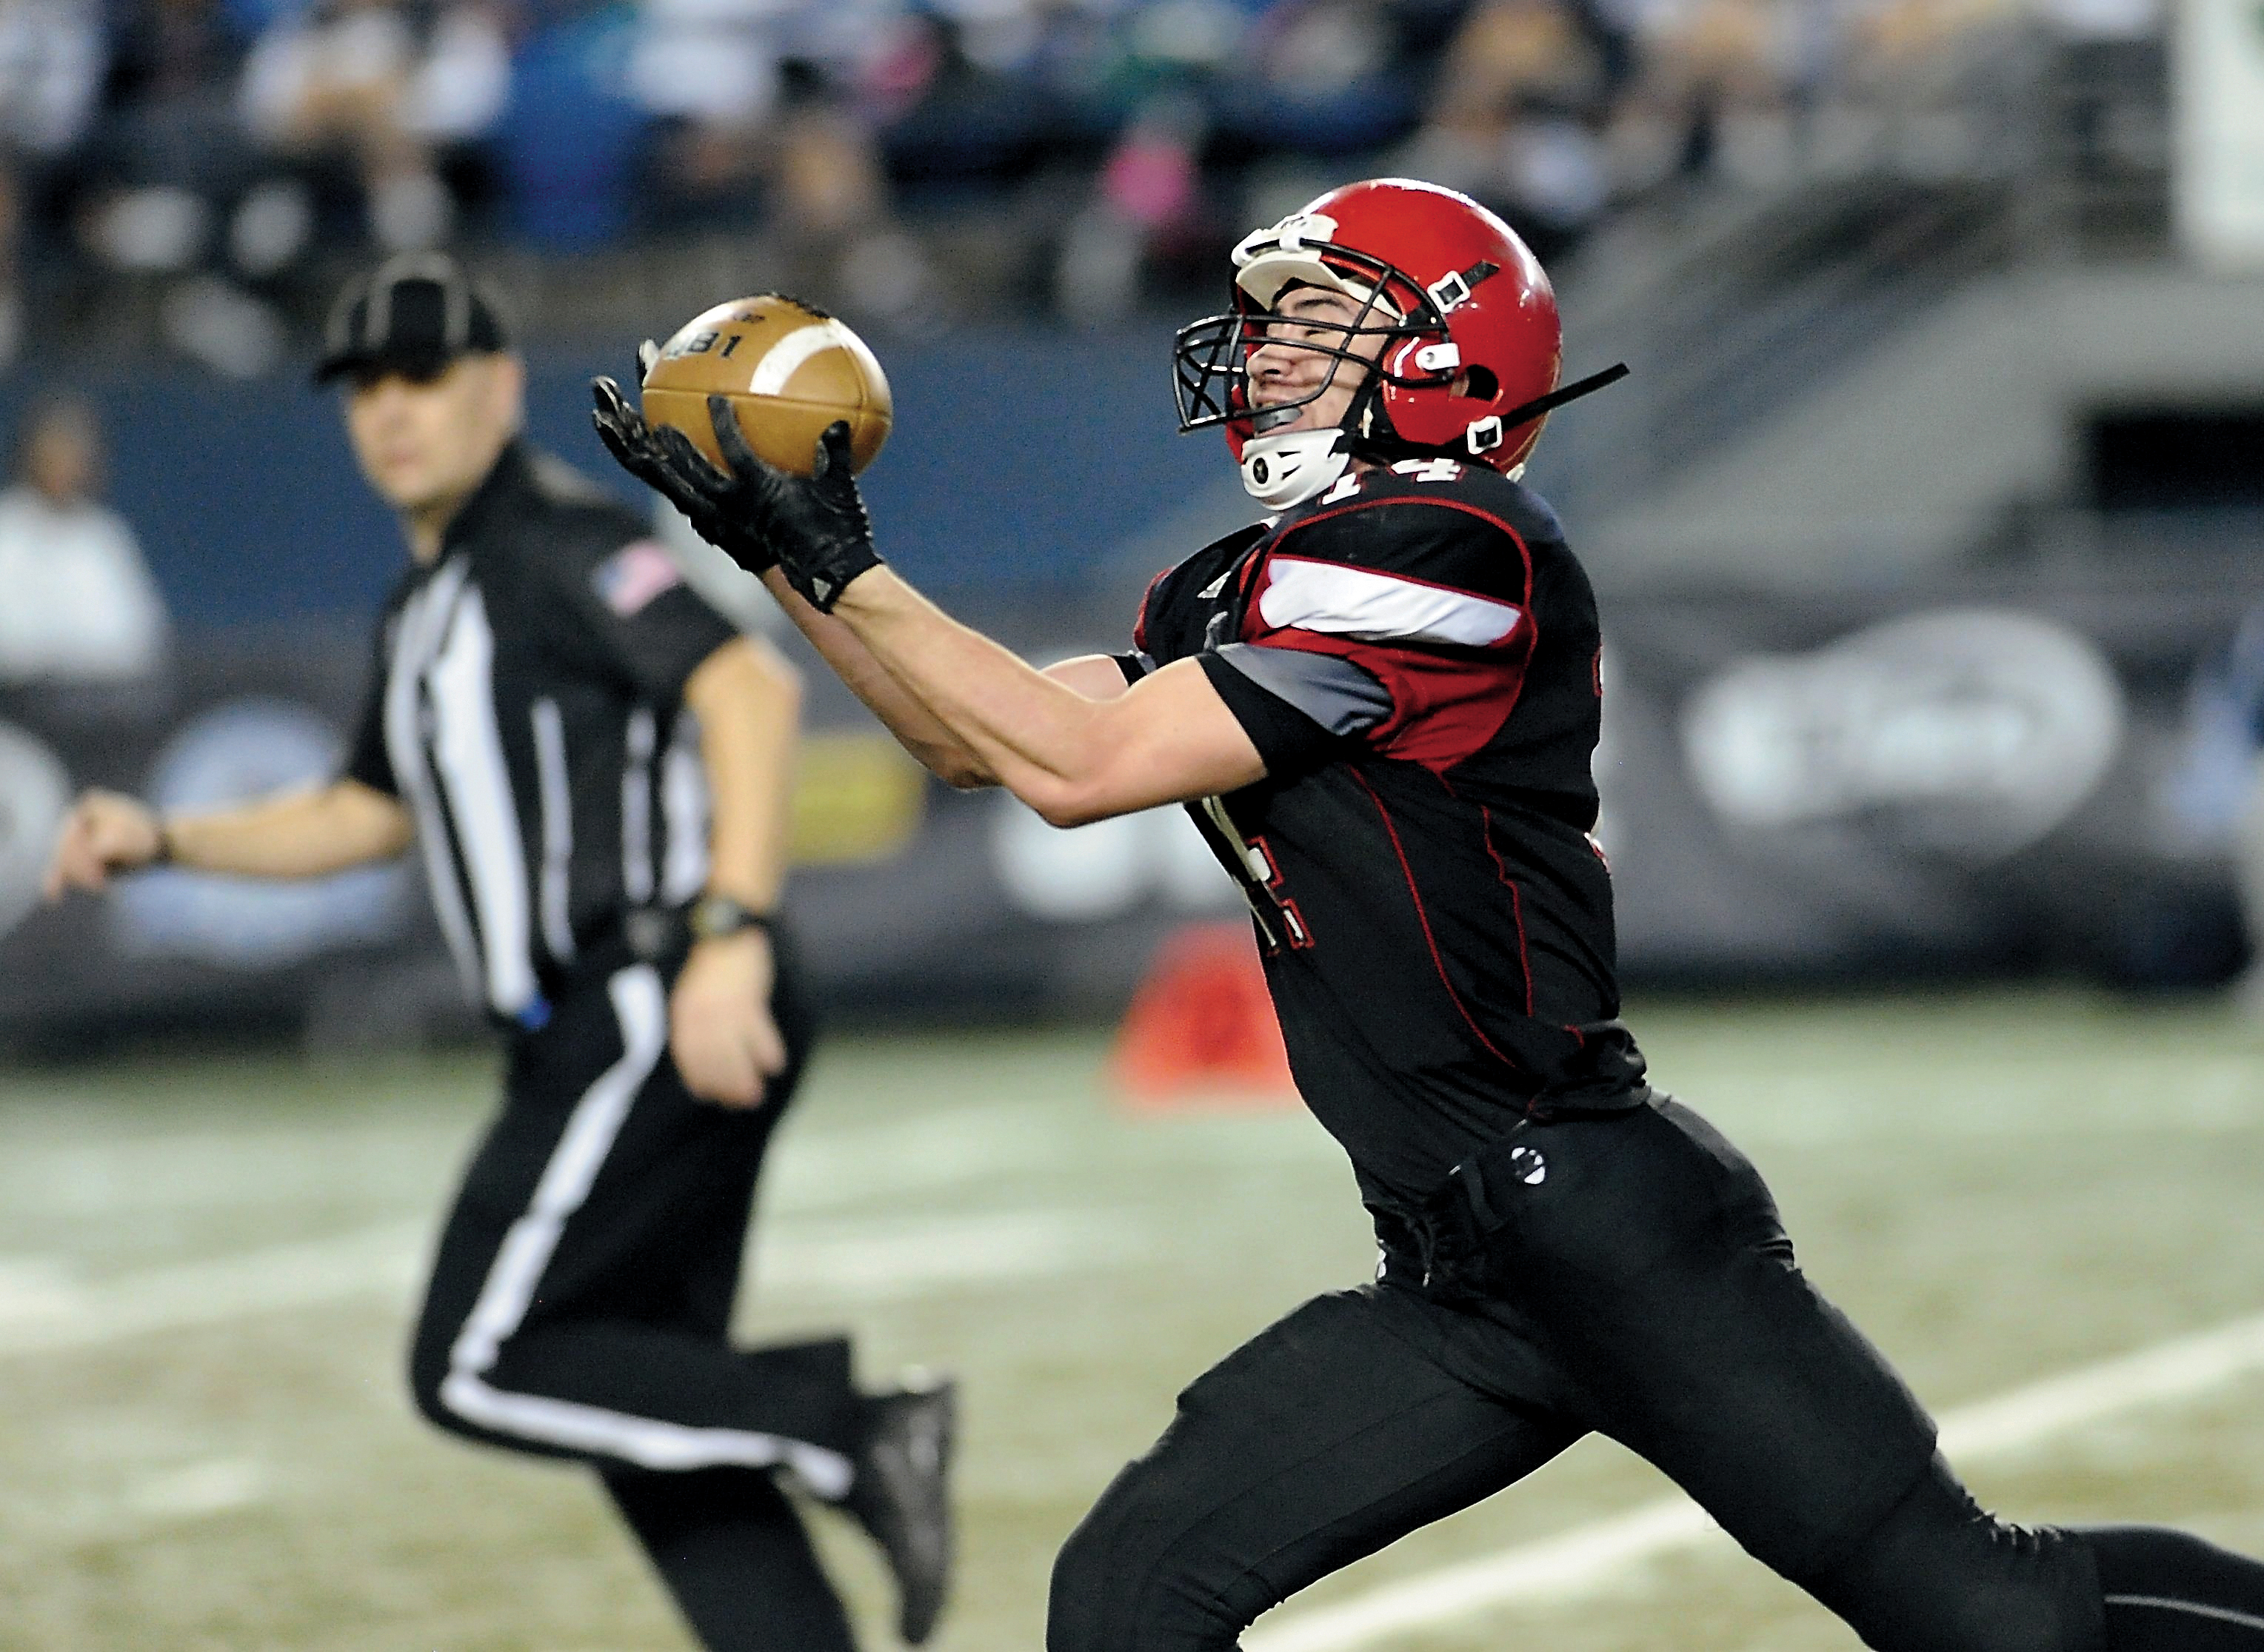 Neah Bay's Cameron Buzzell hauls in a fourth-quarter pass from Rwehabura Munyagi Jr. Buzzell scored a 60-yard touchdown on the play. Both Buzzell and Munyagi will return to the Red Devils next season. Jeff Halstead/for Peninsula Daily News